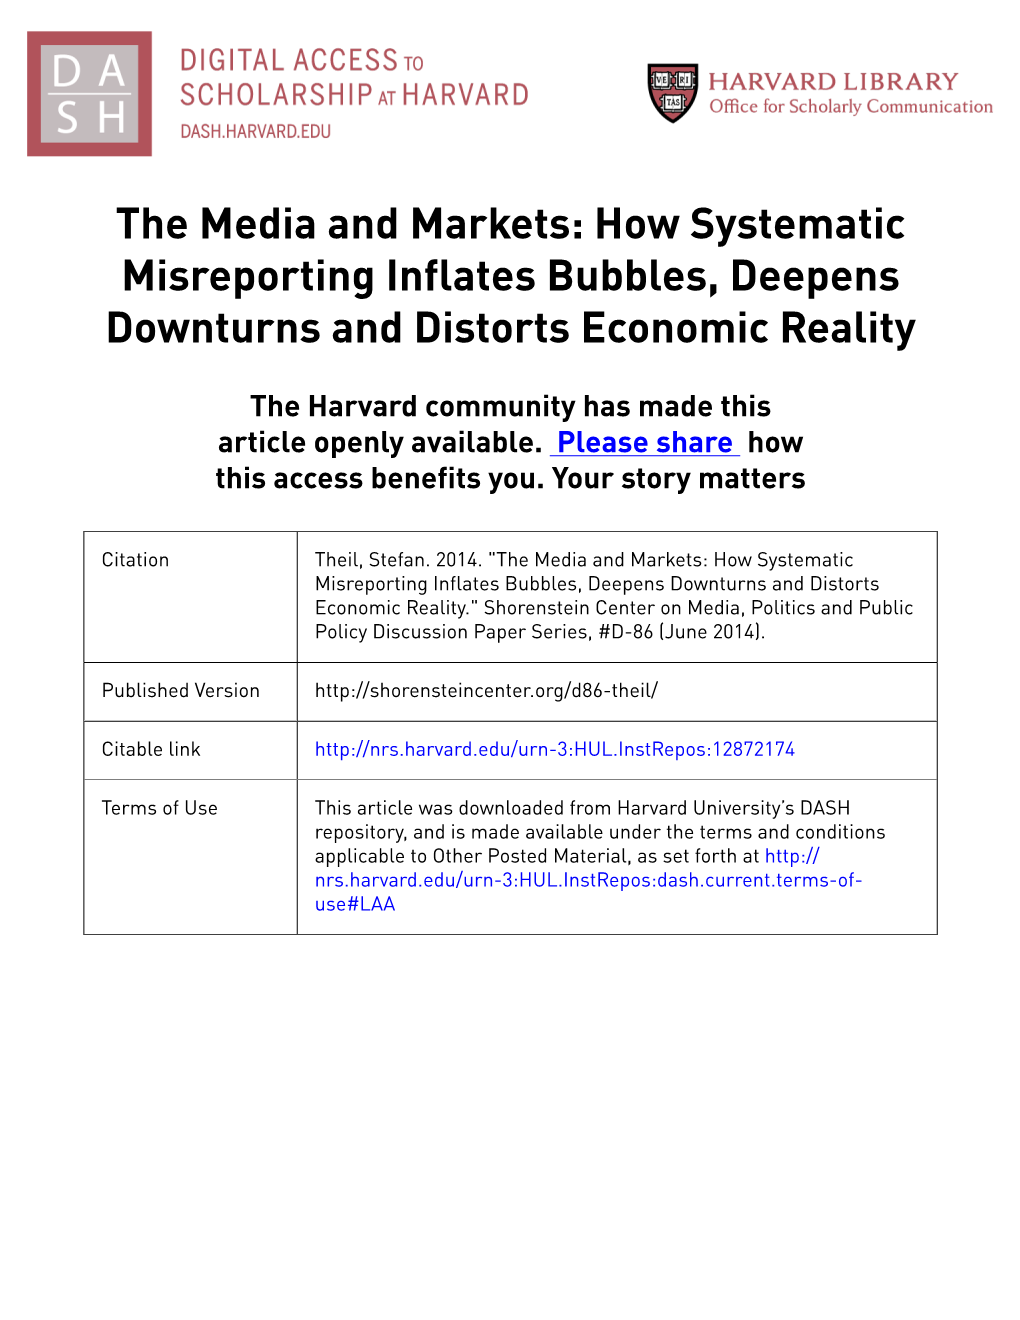 The Media and Markets: How Systematic Misreporting Inflates Bubbles, Deepens Downturns and Distorts Economic Reality